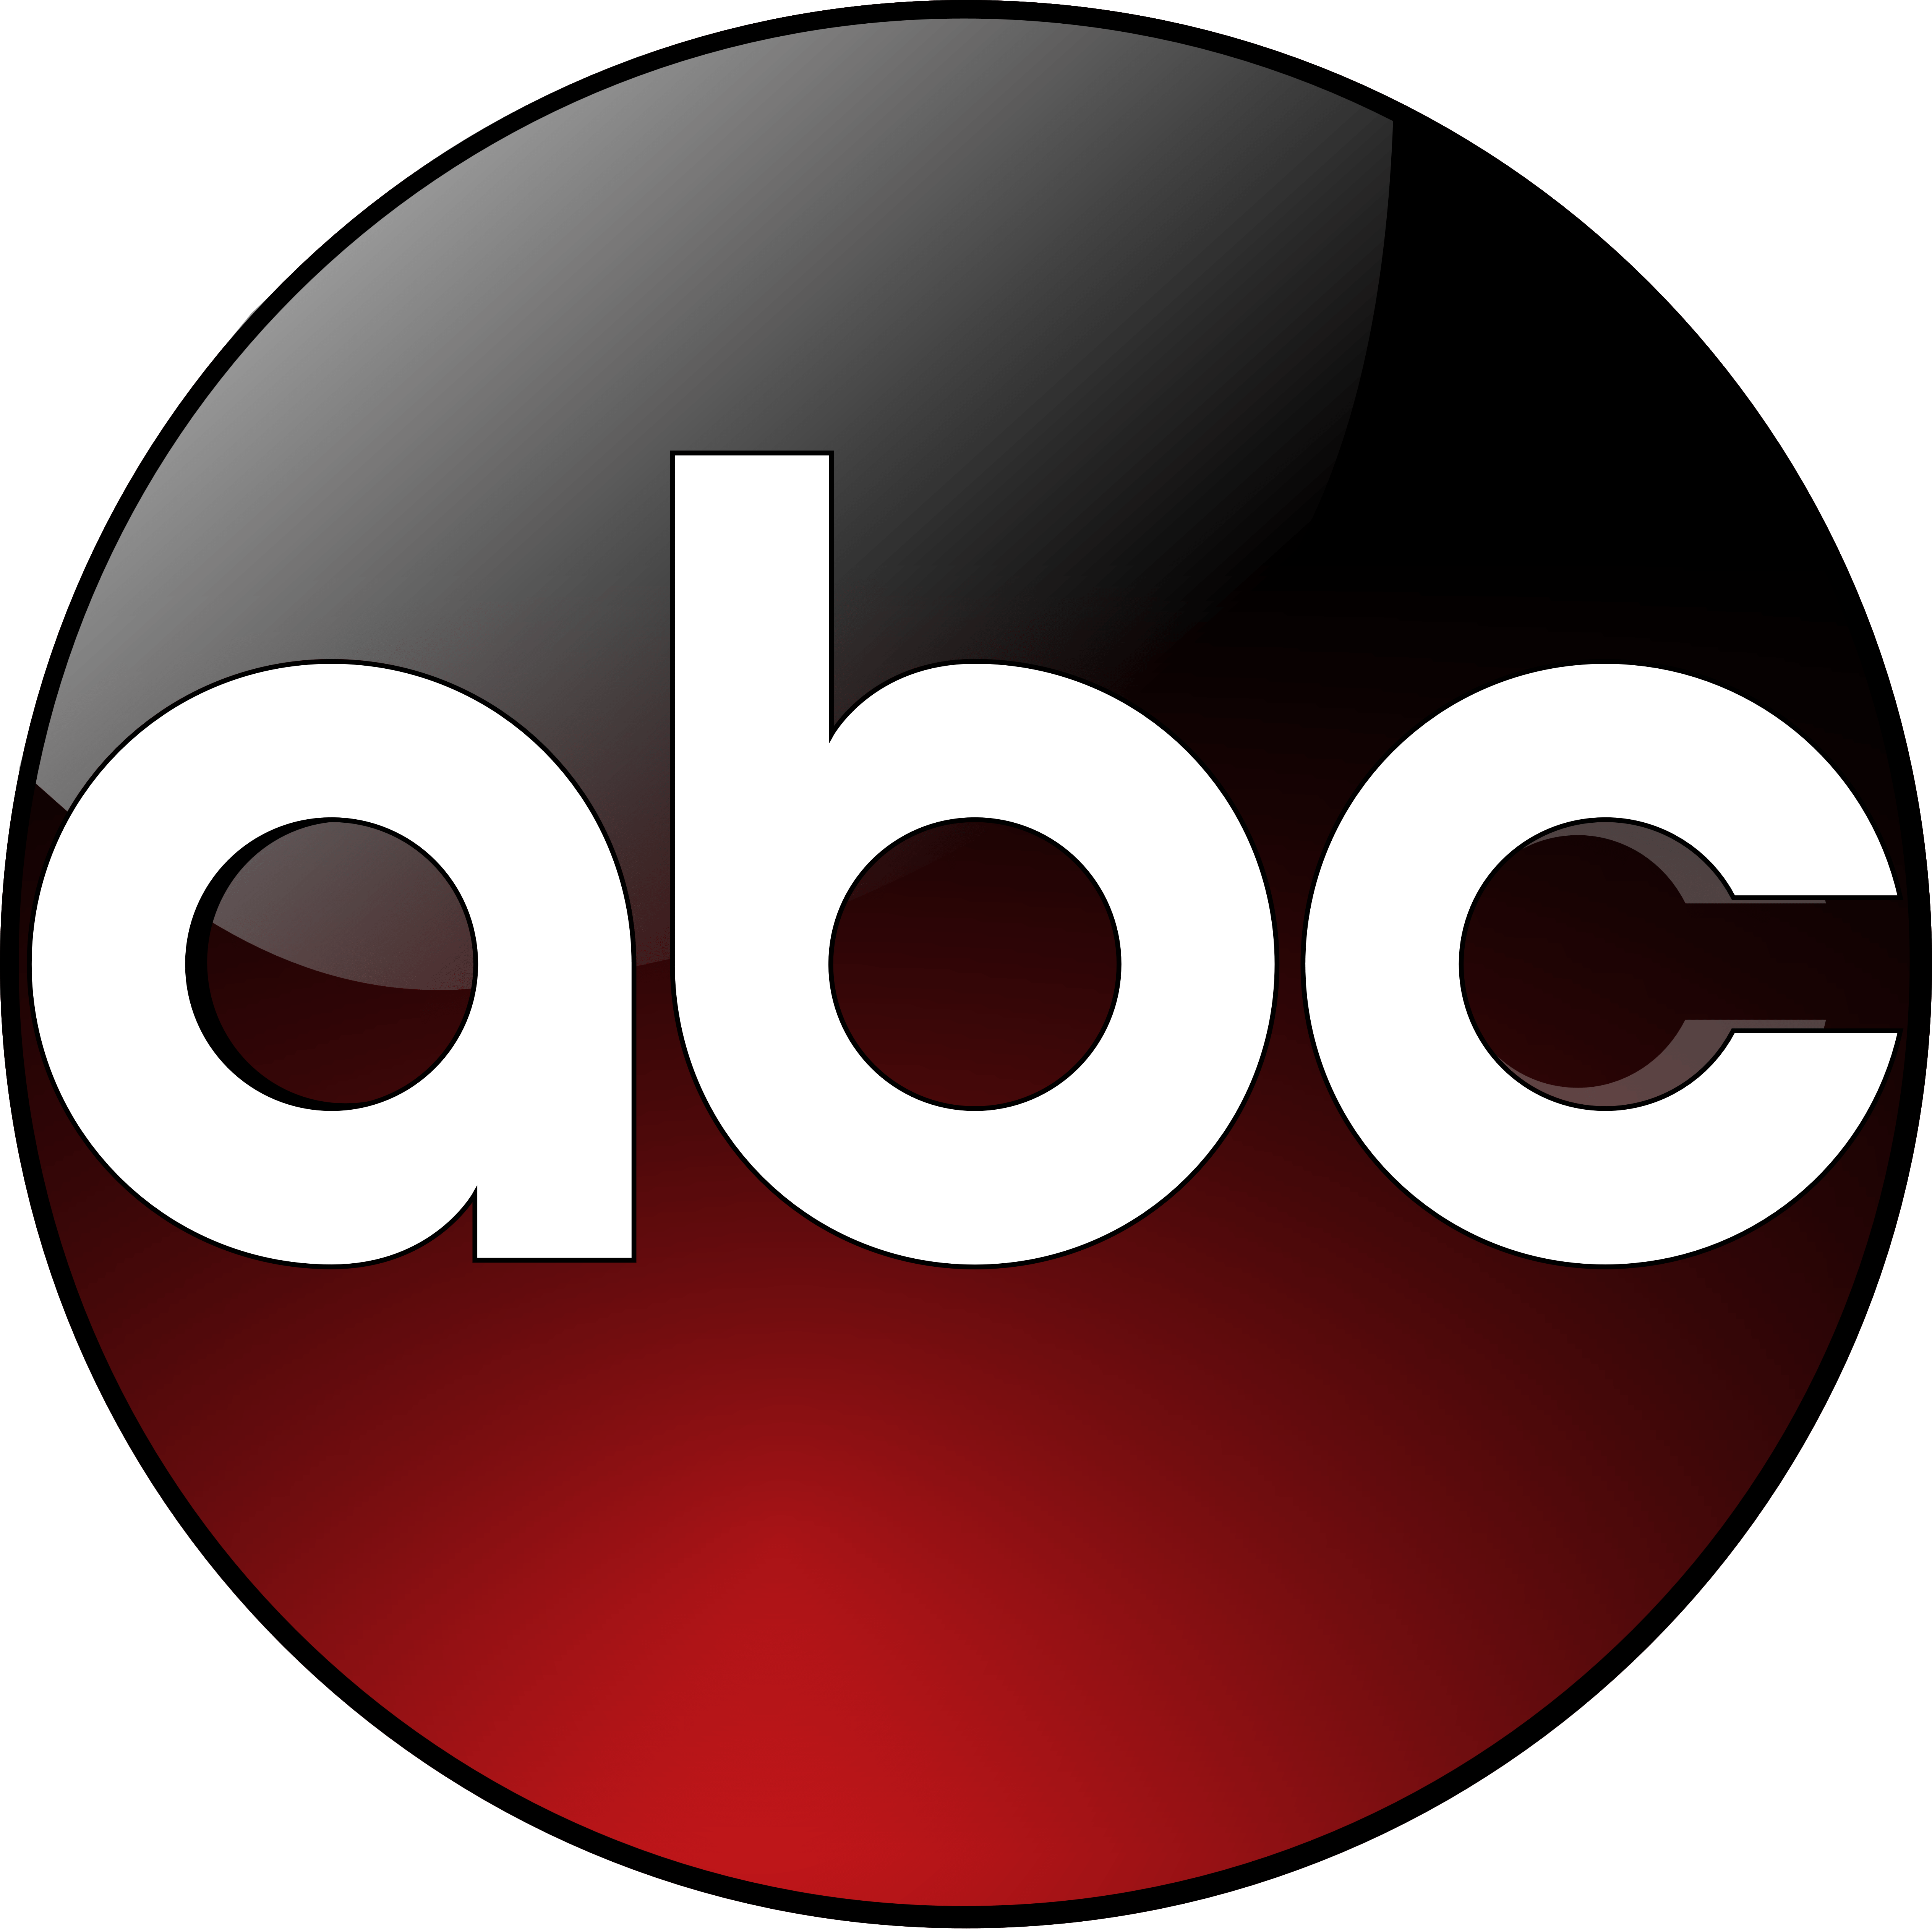 ABC Logo Gr8labor reviews and ratings